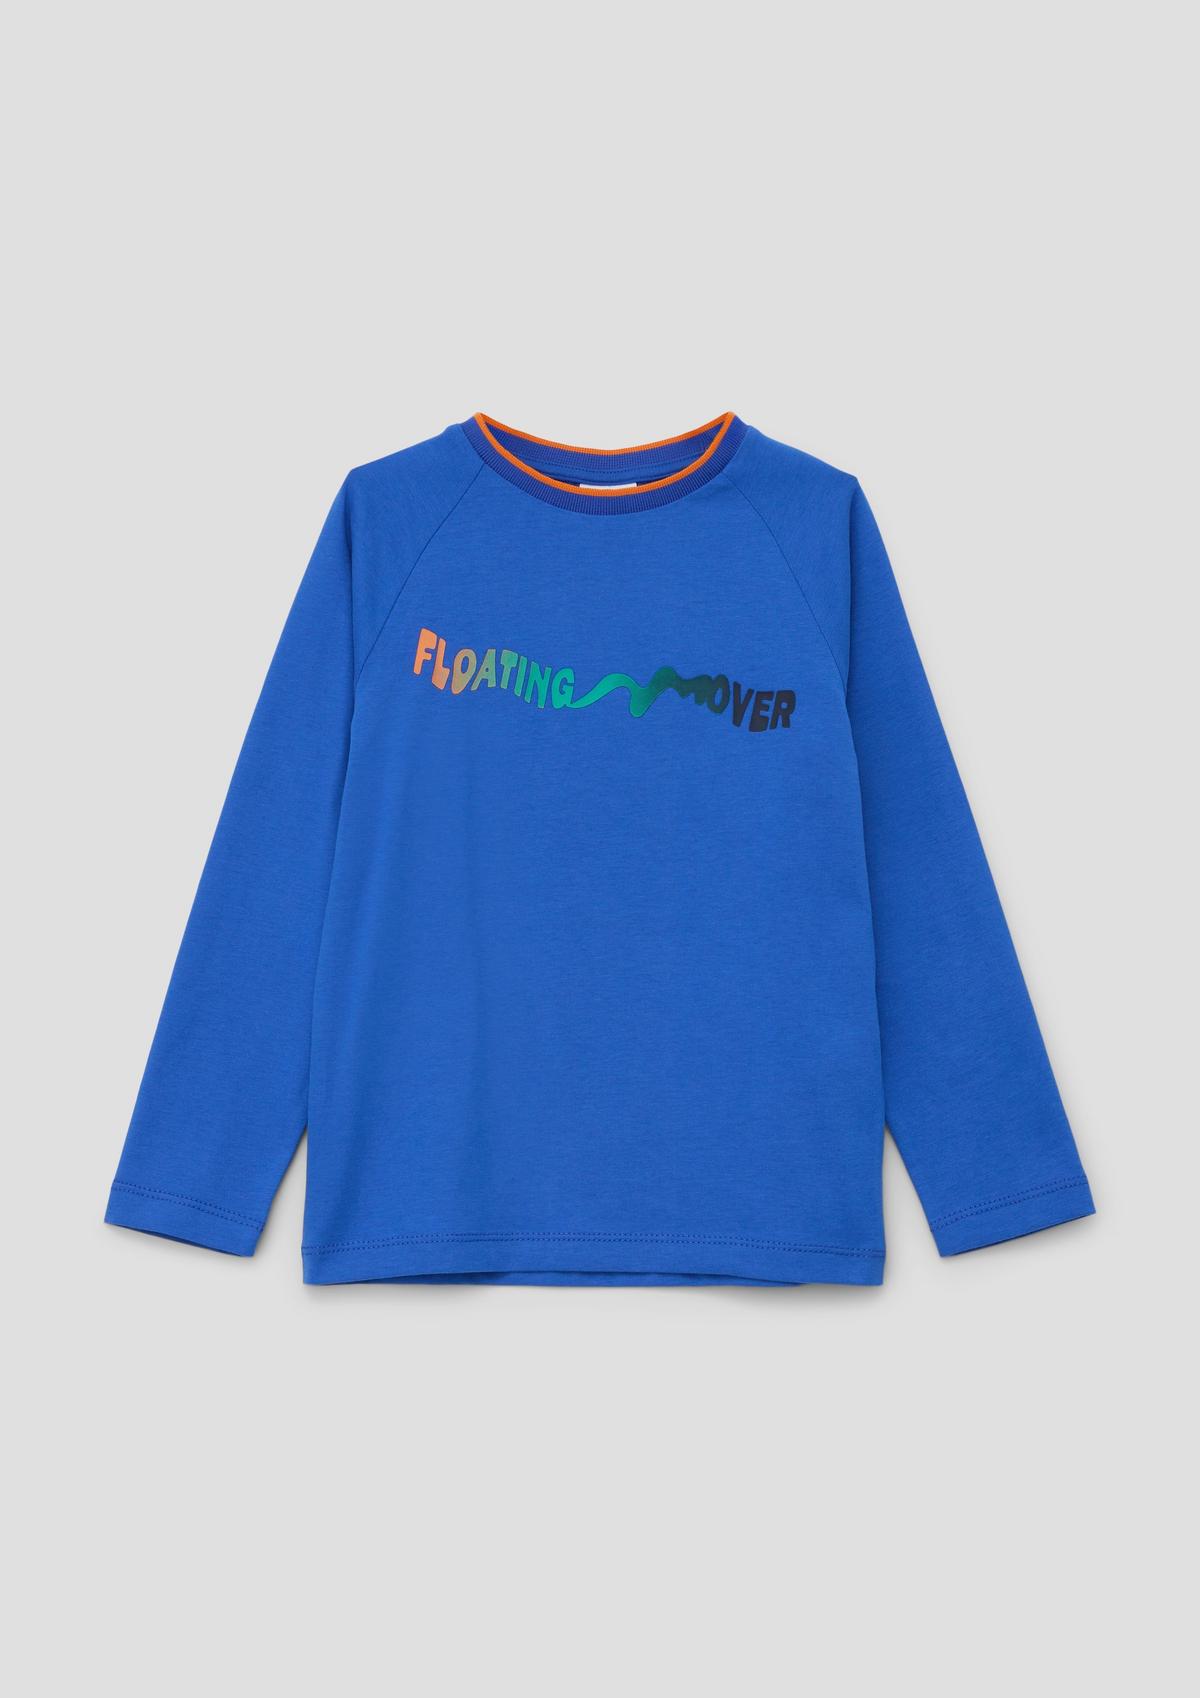 s.Oliver Long sleeve top with rubberised printed lettering